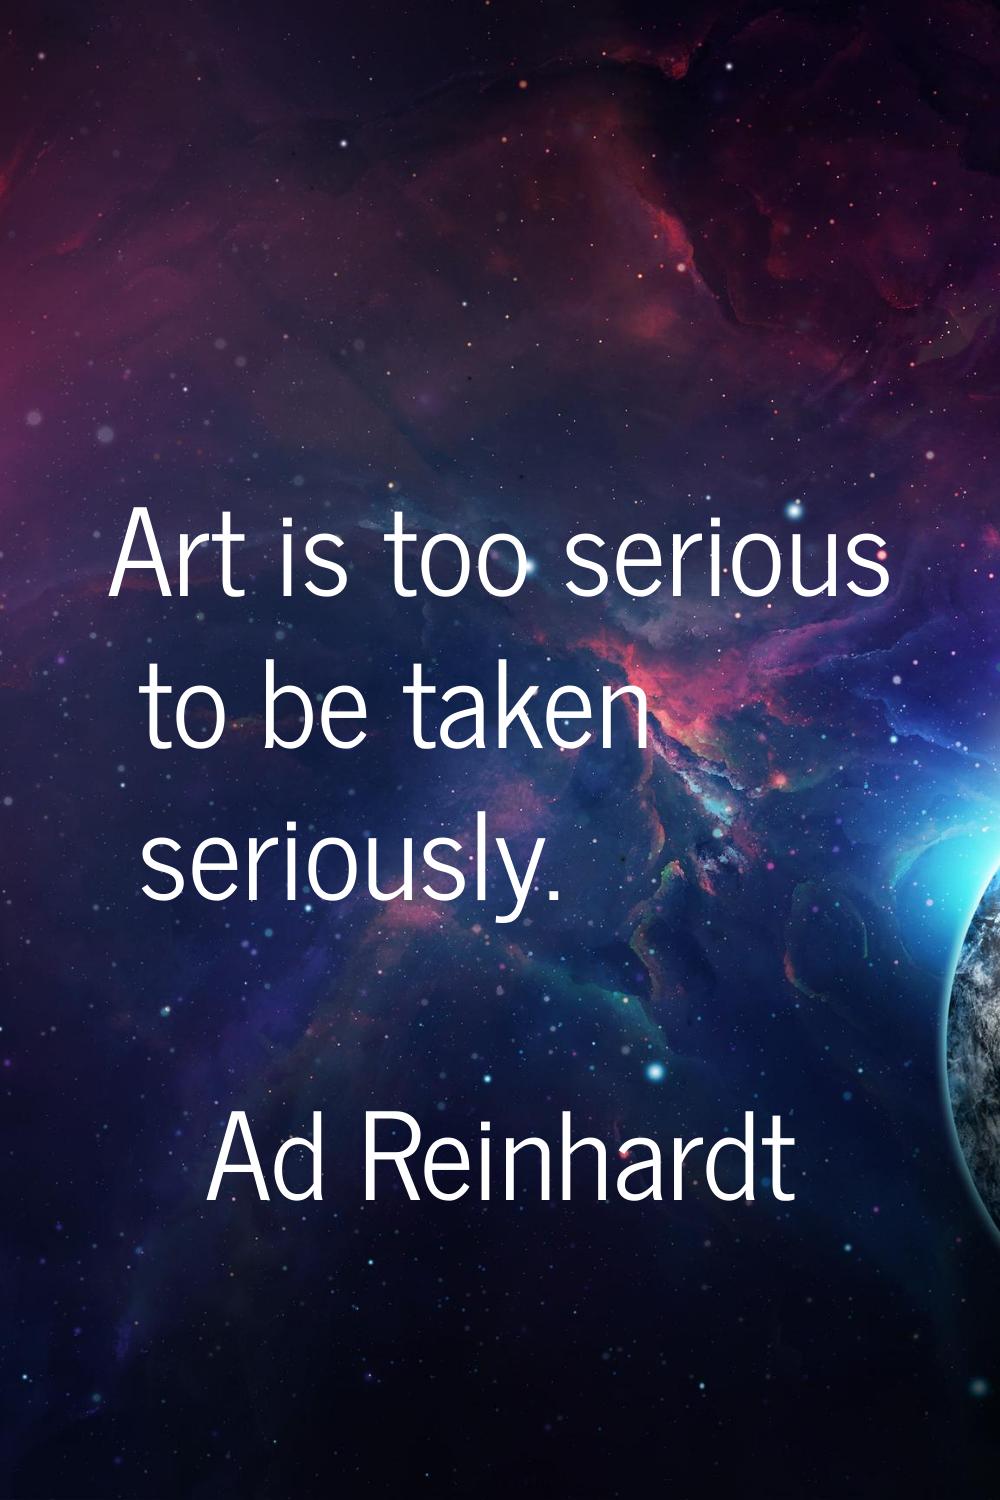 Art is too serious to be taken seriously.